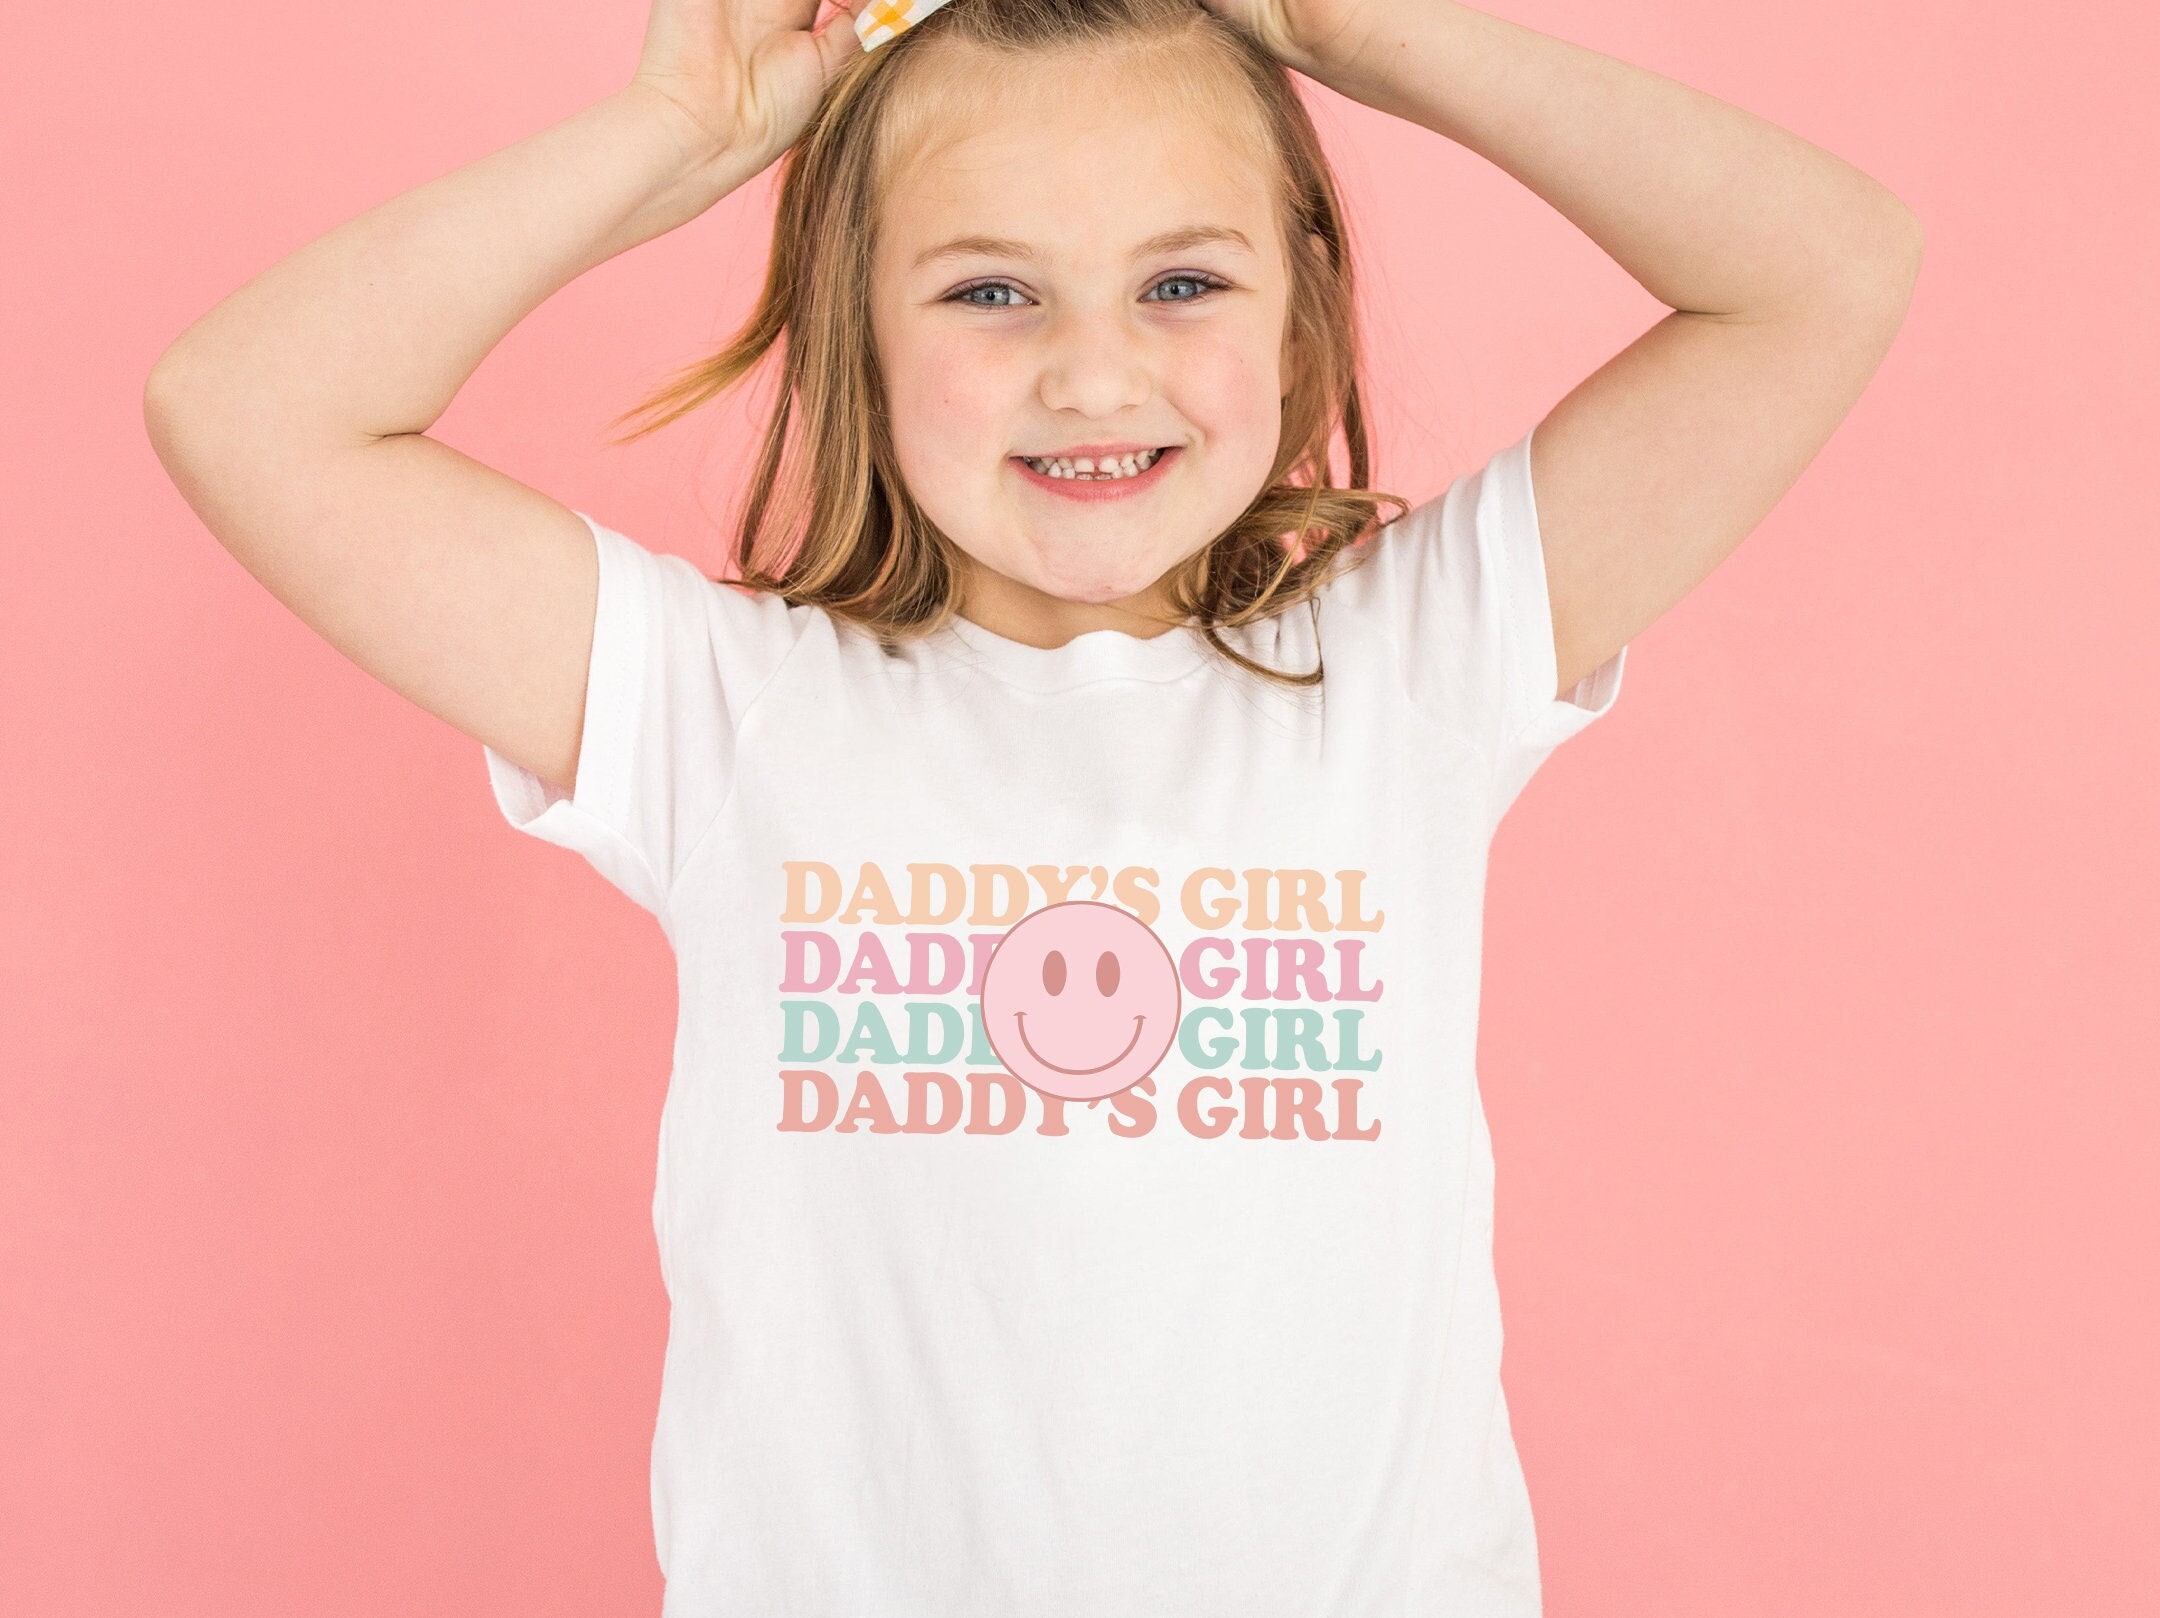 Daddy's Girl Shirt Camo Daddy and Daddy's Girl -  Portugal